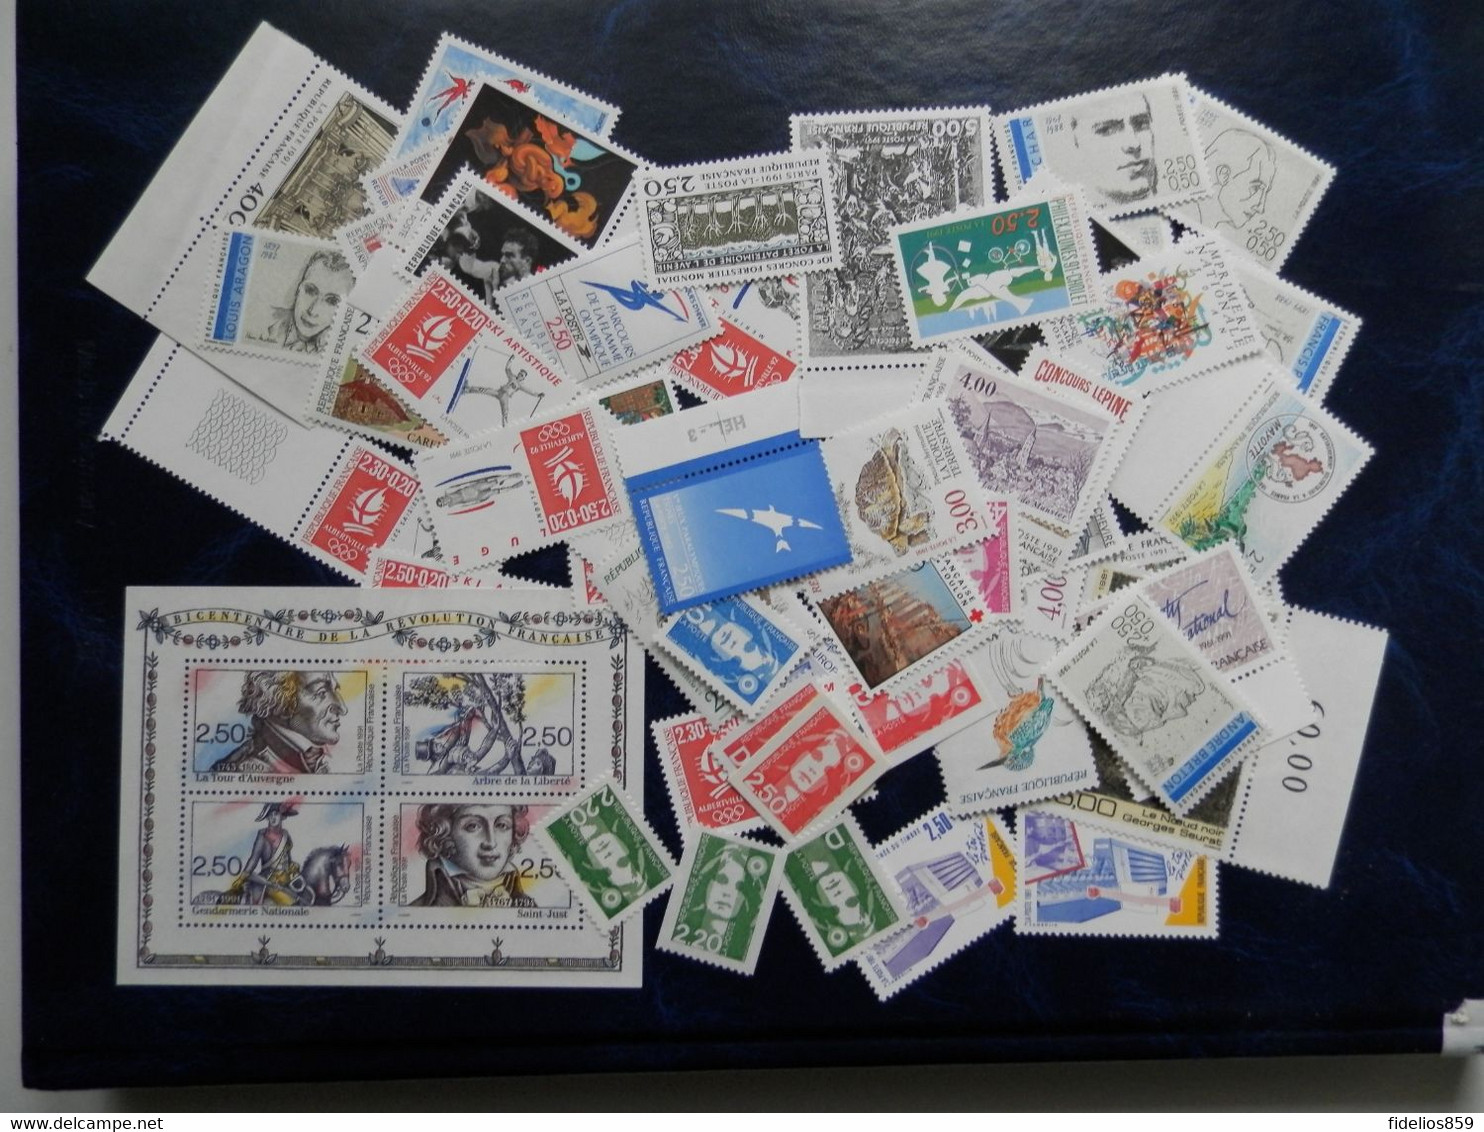 FRANCE : ANNEE COMPLETE 1991 ** SOIT 59 TIMBRES POSTE DONT LE BF 13 QUALITE LUXE - 1990-1999